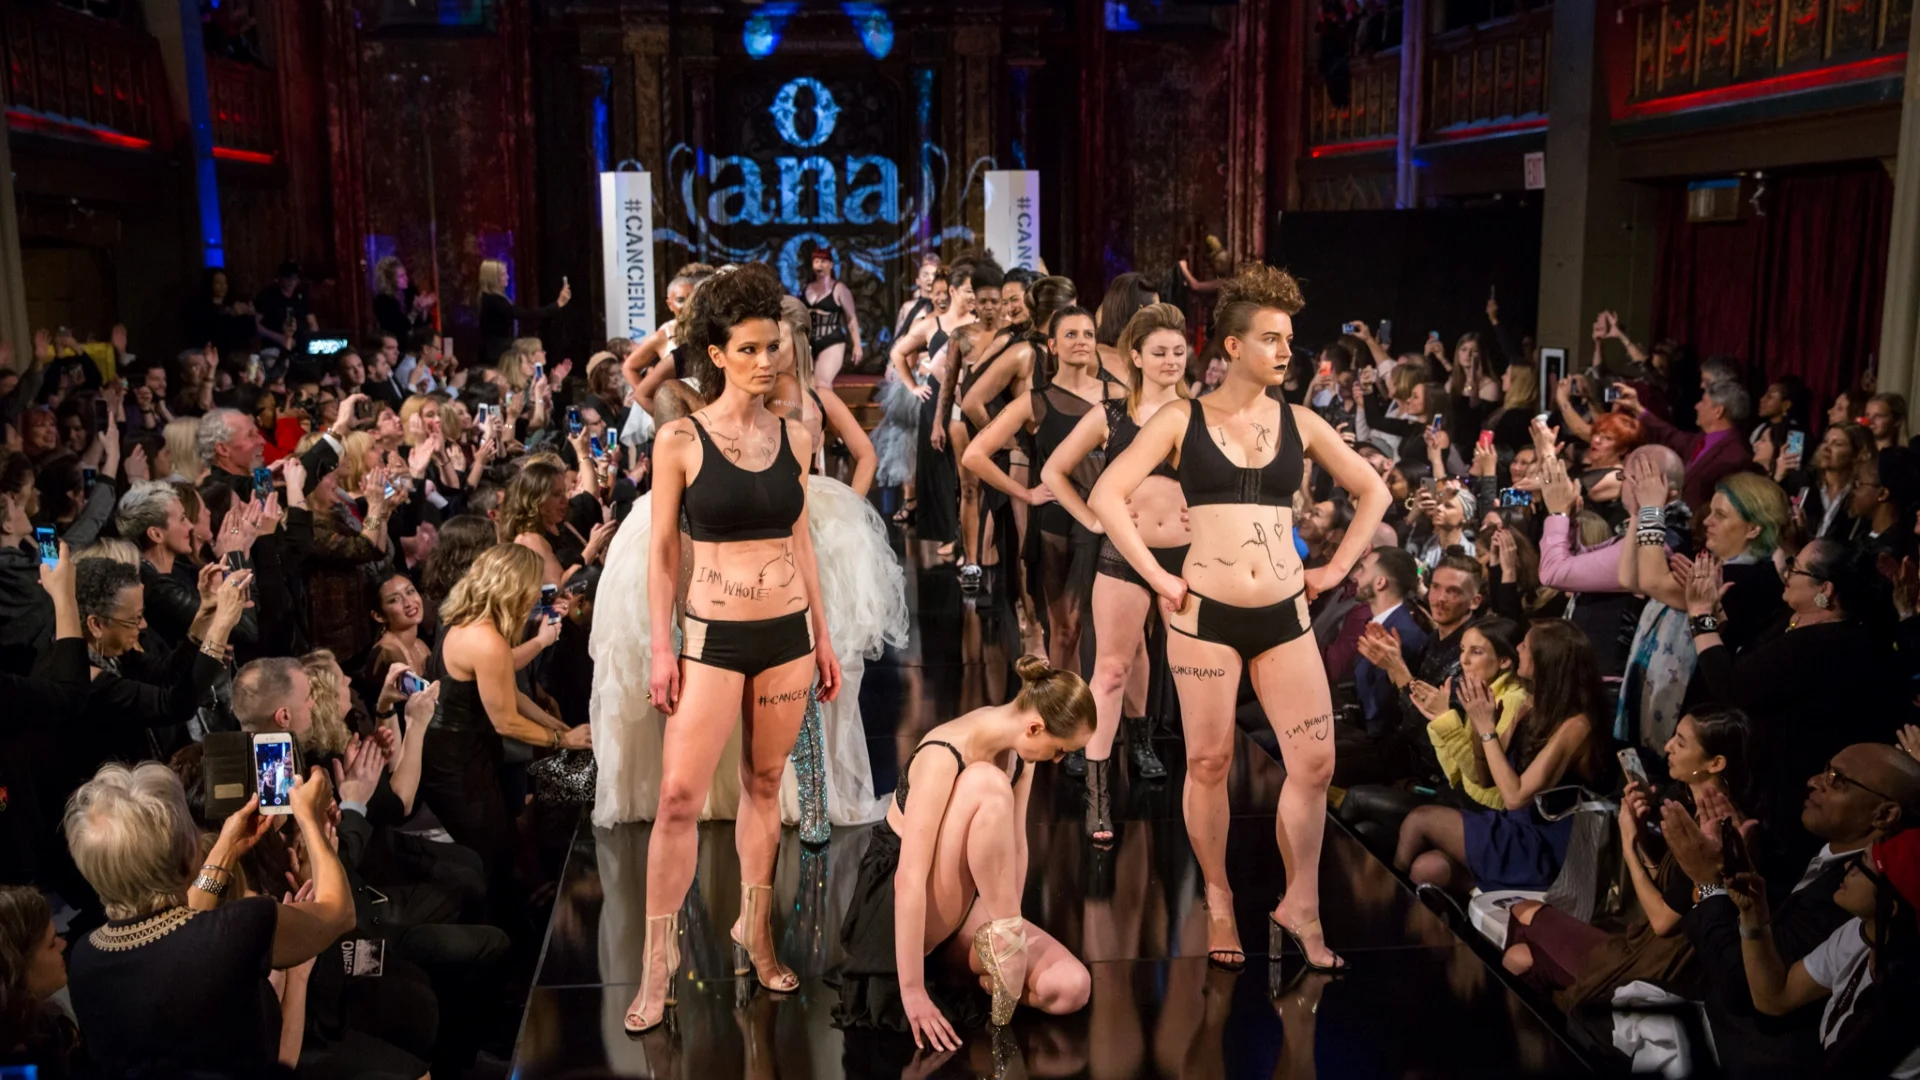 DISARRAY - Penthouse Lingerie Fashion Show Benefits Breast Cancer Research